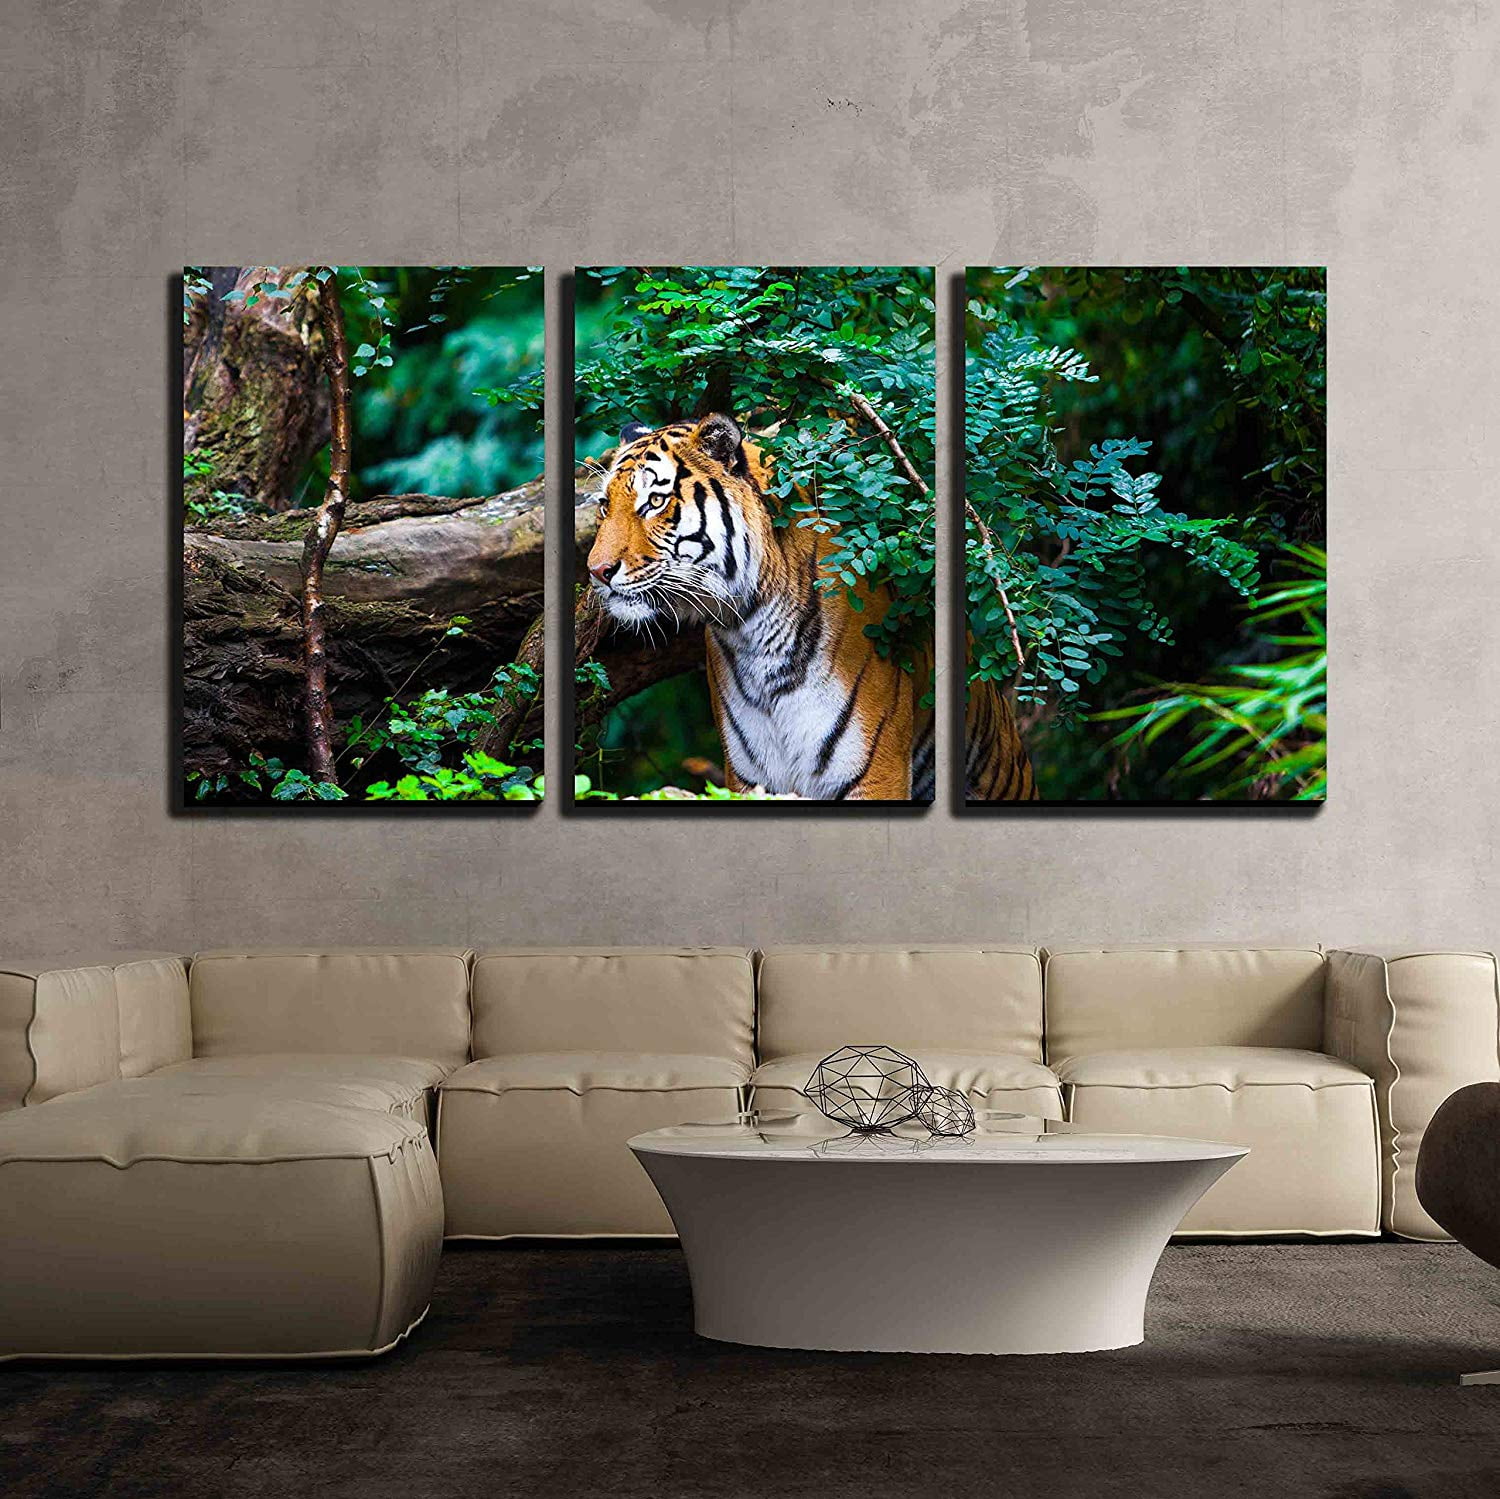 Wall26 3 Piece Canvas Wall Art - Tiger - Modern Home Decor Stretched